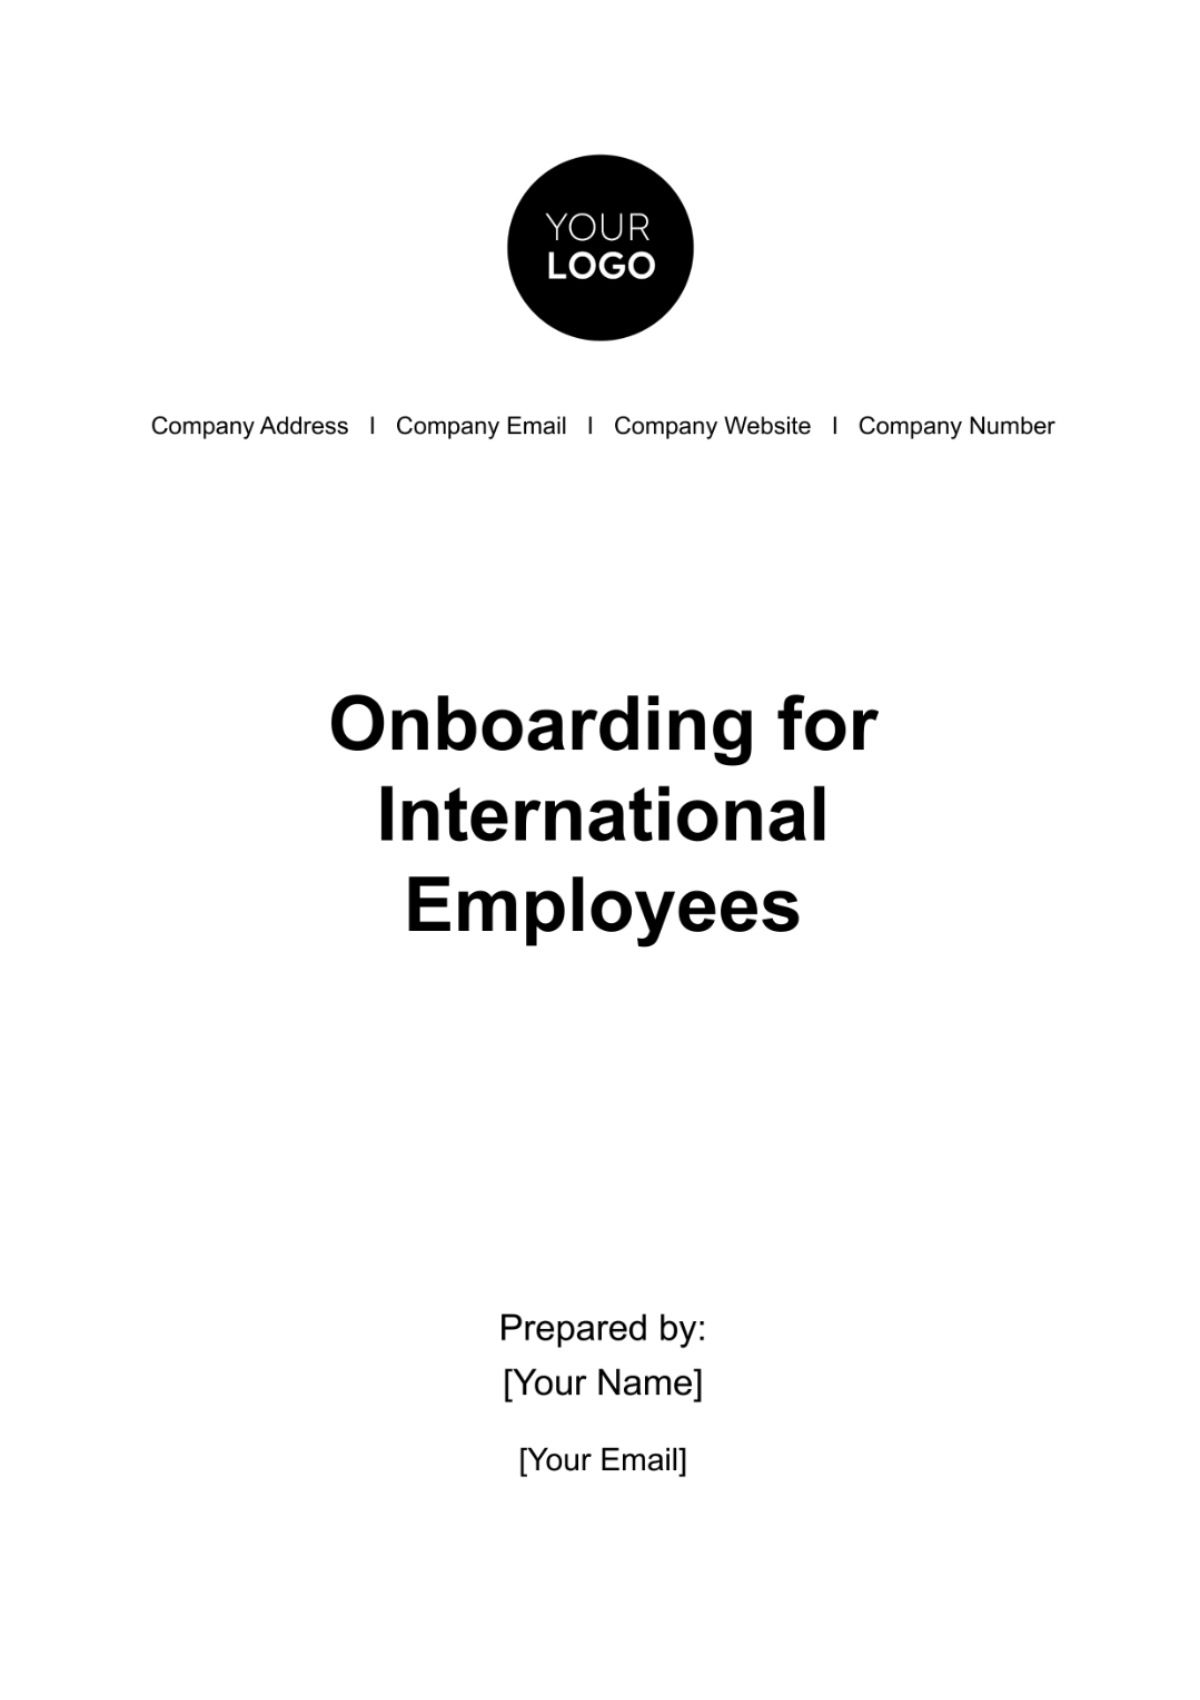 Onboarding for International Employees HR Template